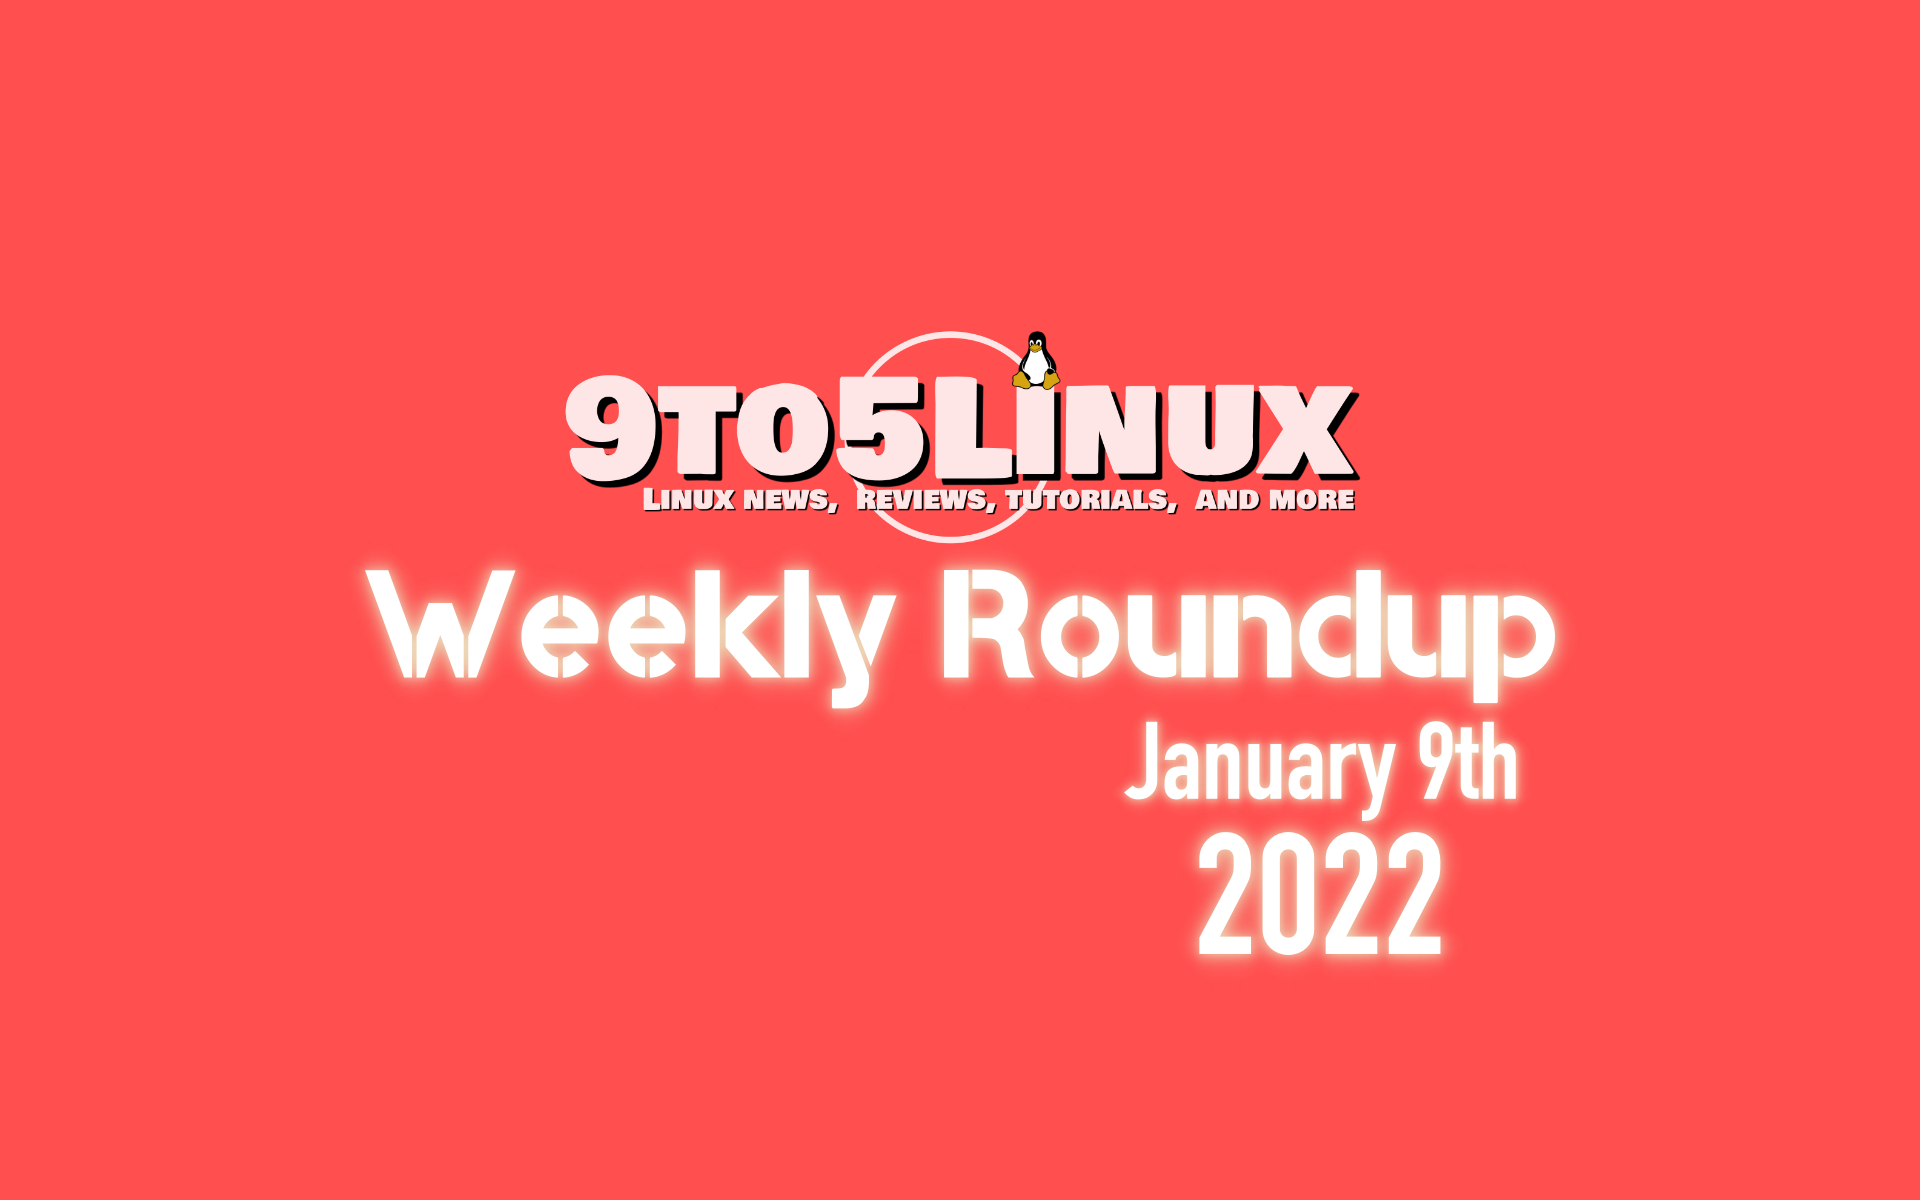 9to5Linux Weekly Roundup: January 9th, 2022